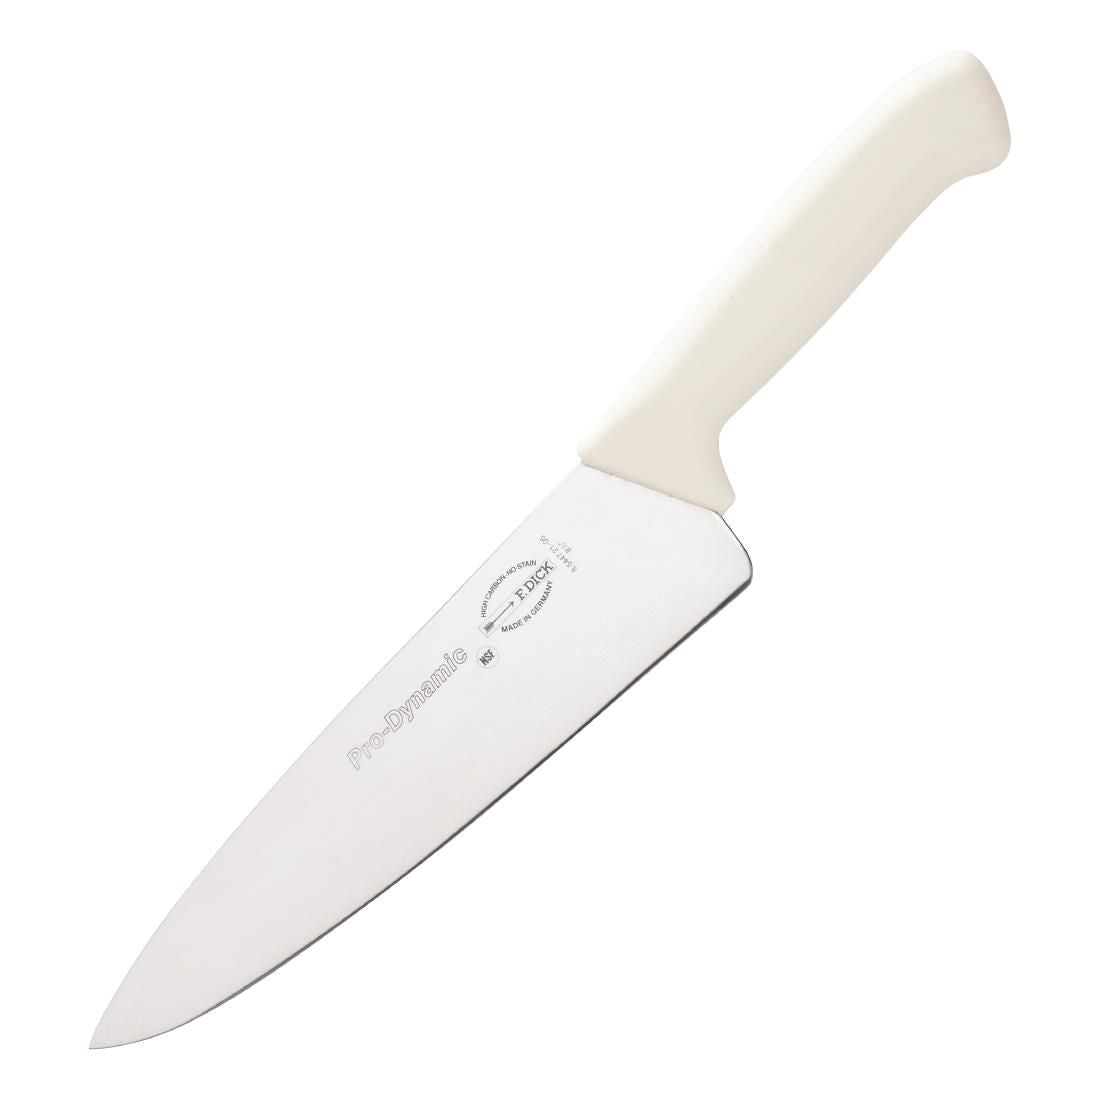 DL373 Dick Pro Dynamic HACCP Chefs Knife White 21.5cm JD Catering Equipment Solutions Ltd